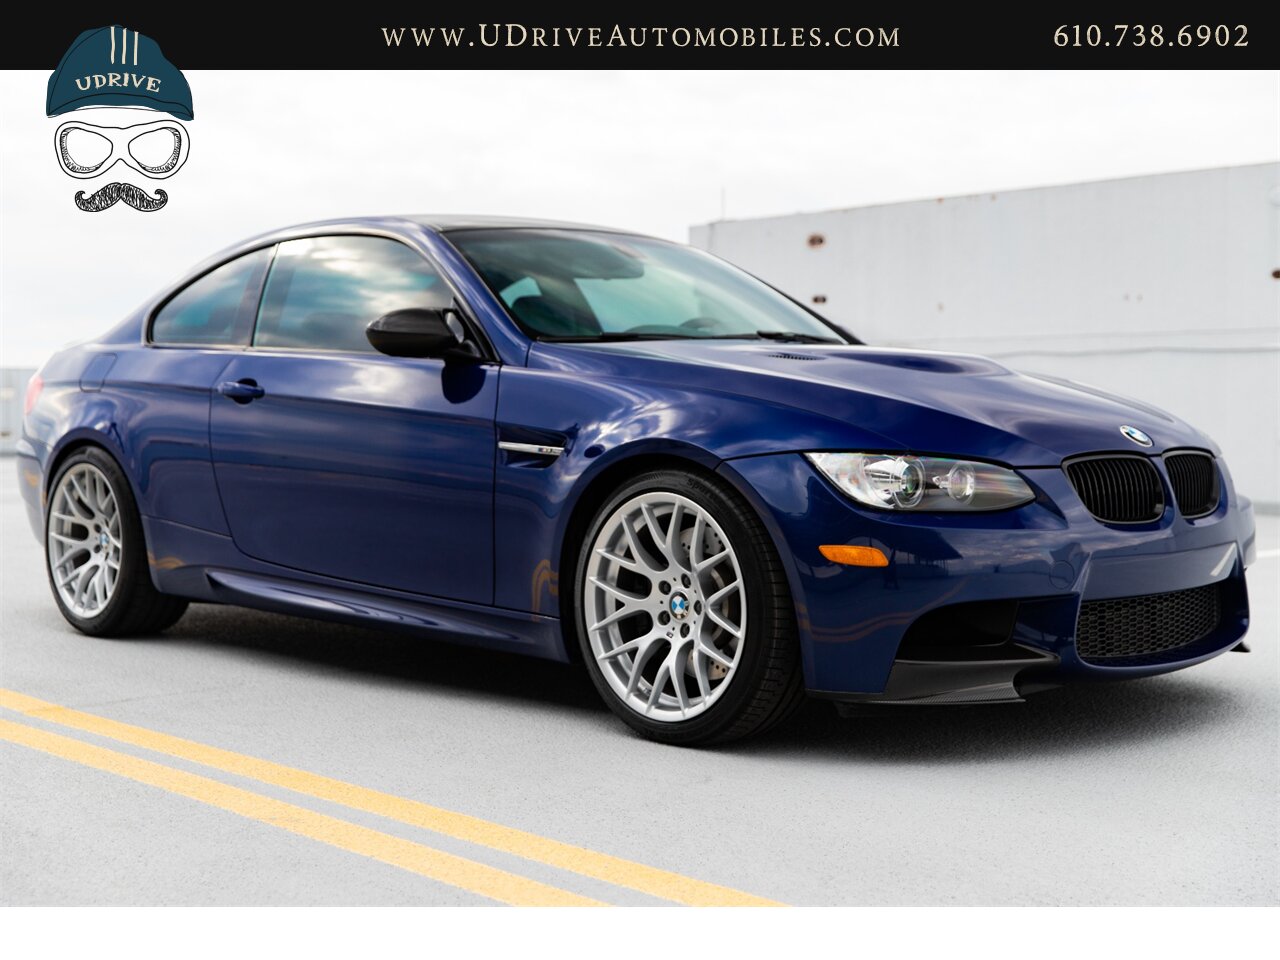 2011 BMW M3 E92 6 Speed Manual Competition Pkg Interlagos Blue  16k Miles Nav PDC EDC Comf Acc - Photo 15 - West Chester, PA 19382